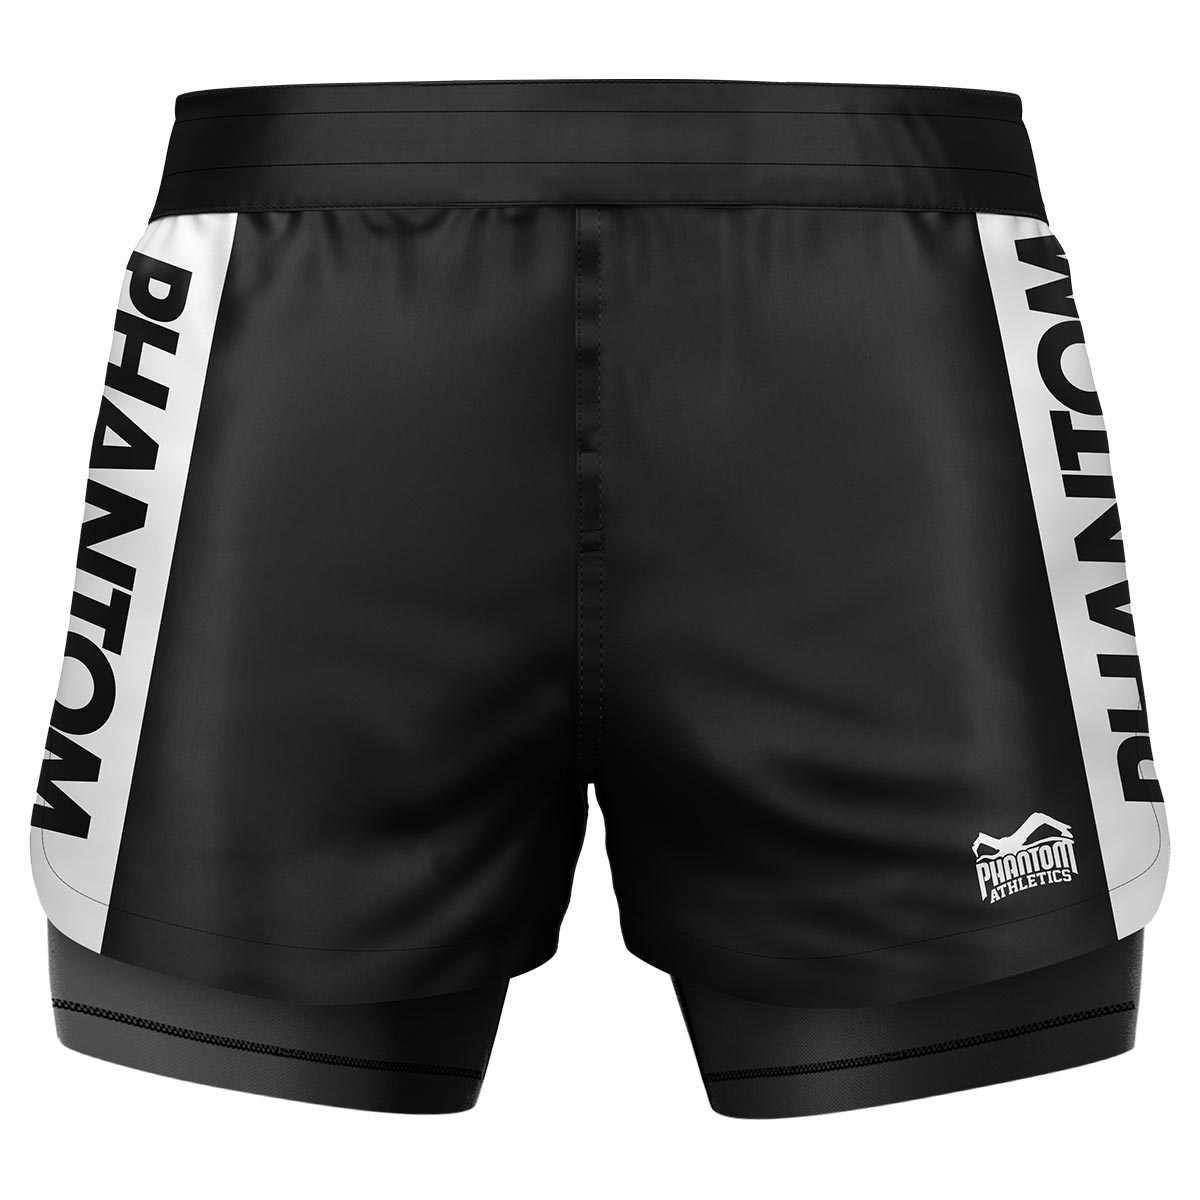 Phantom Fightshorts Fusion 2in1. Ultimate shorts for your martial arts with integrated compression shorts. Ideal for MMA, BJJ, wrestling, grappling or Muay Thai. In black with PHANTOM lettering.